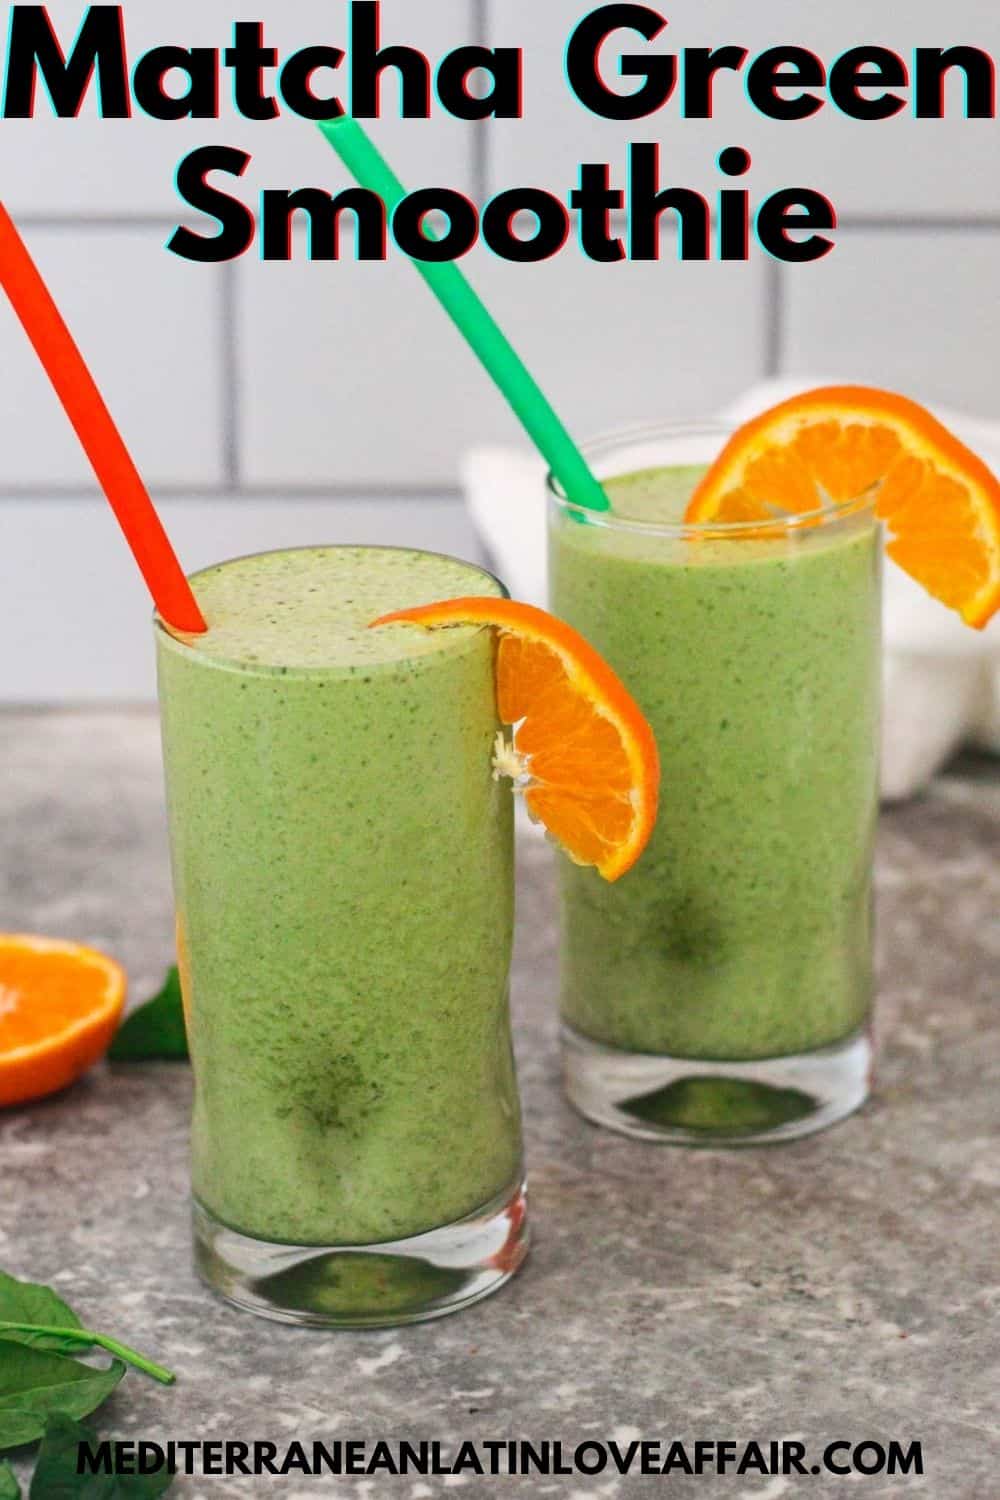 An image prepared for Pinterest. In the middle there's a picture of two green smoothie glasses with mandarin slices and straws. On top there's a title bar and bottom the website link. 